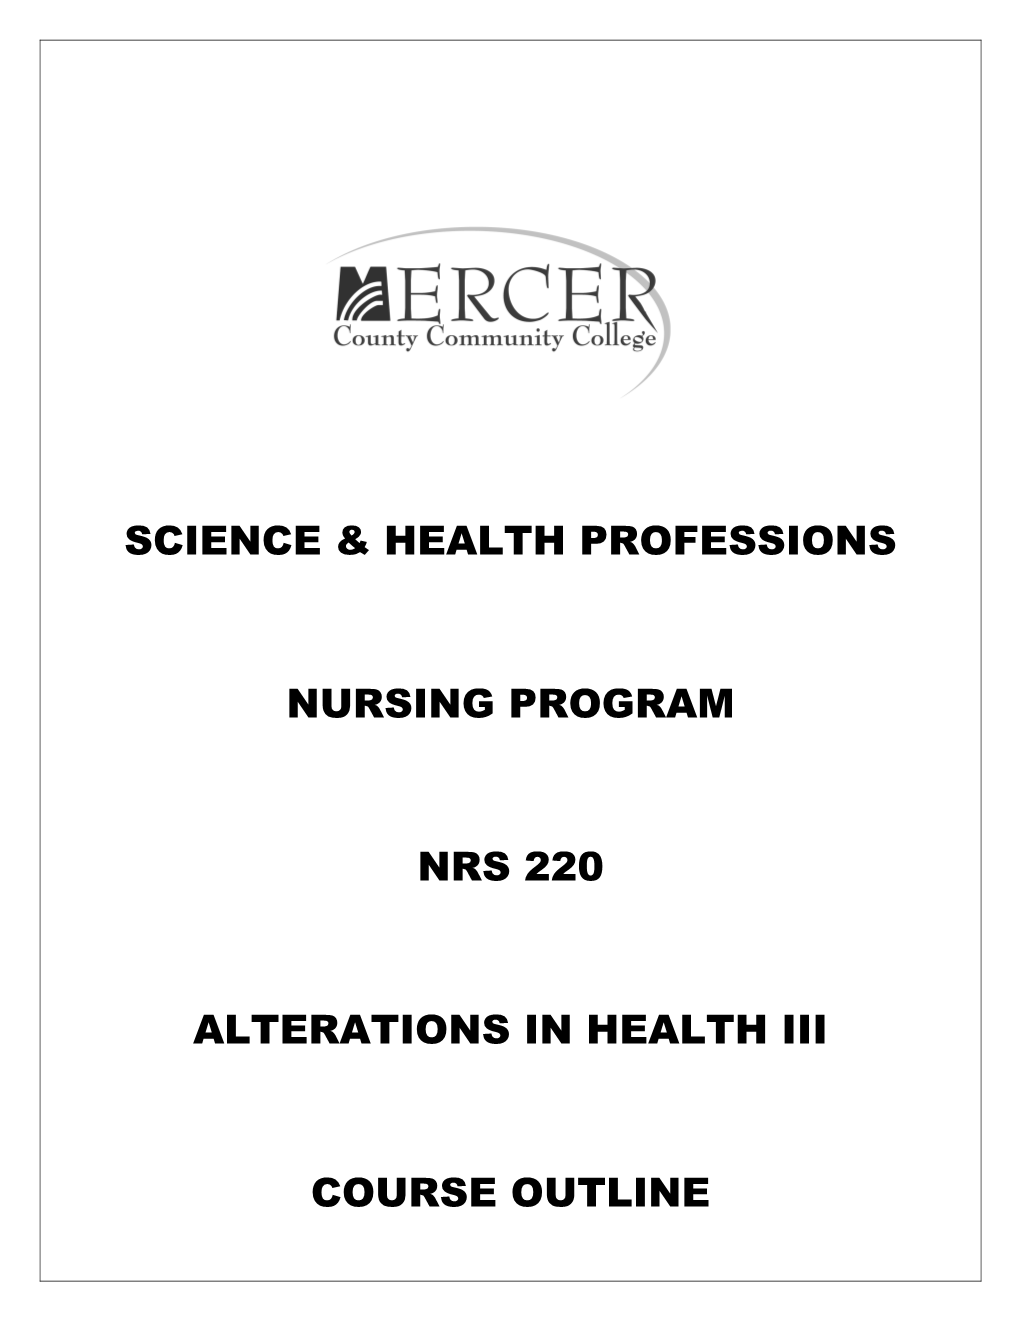 Science & Health Professions